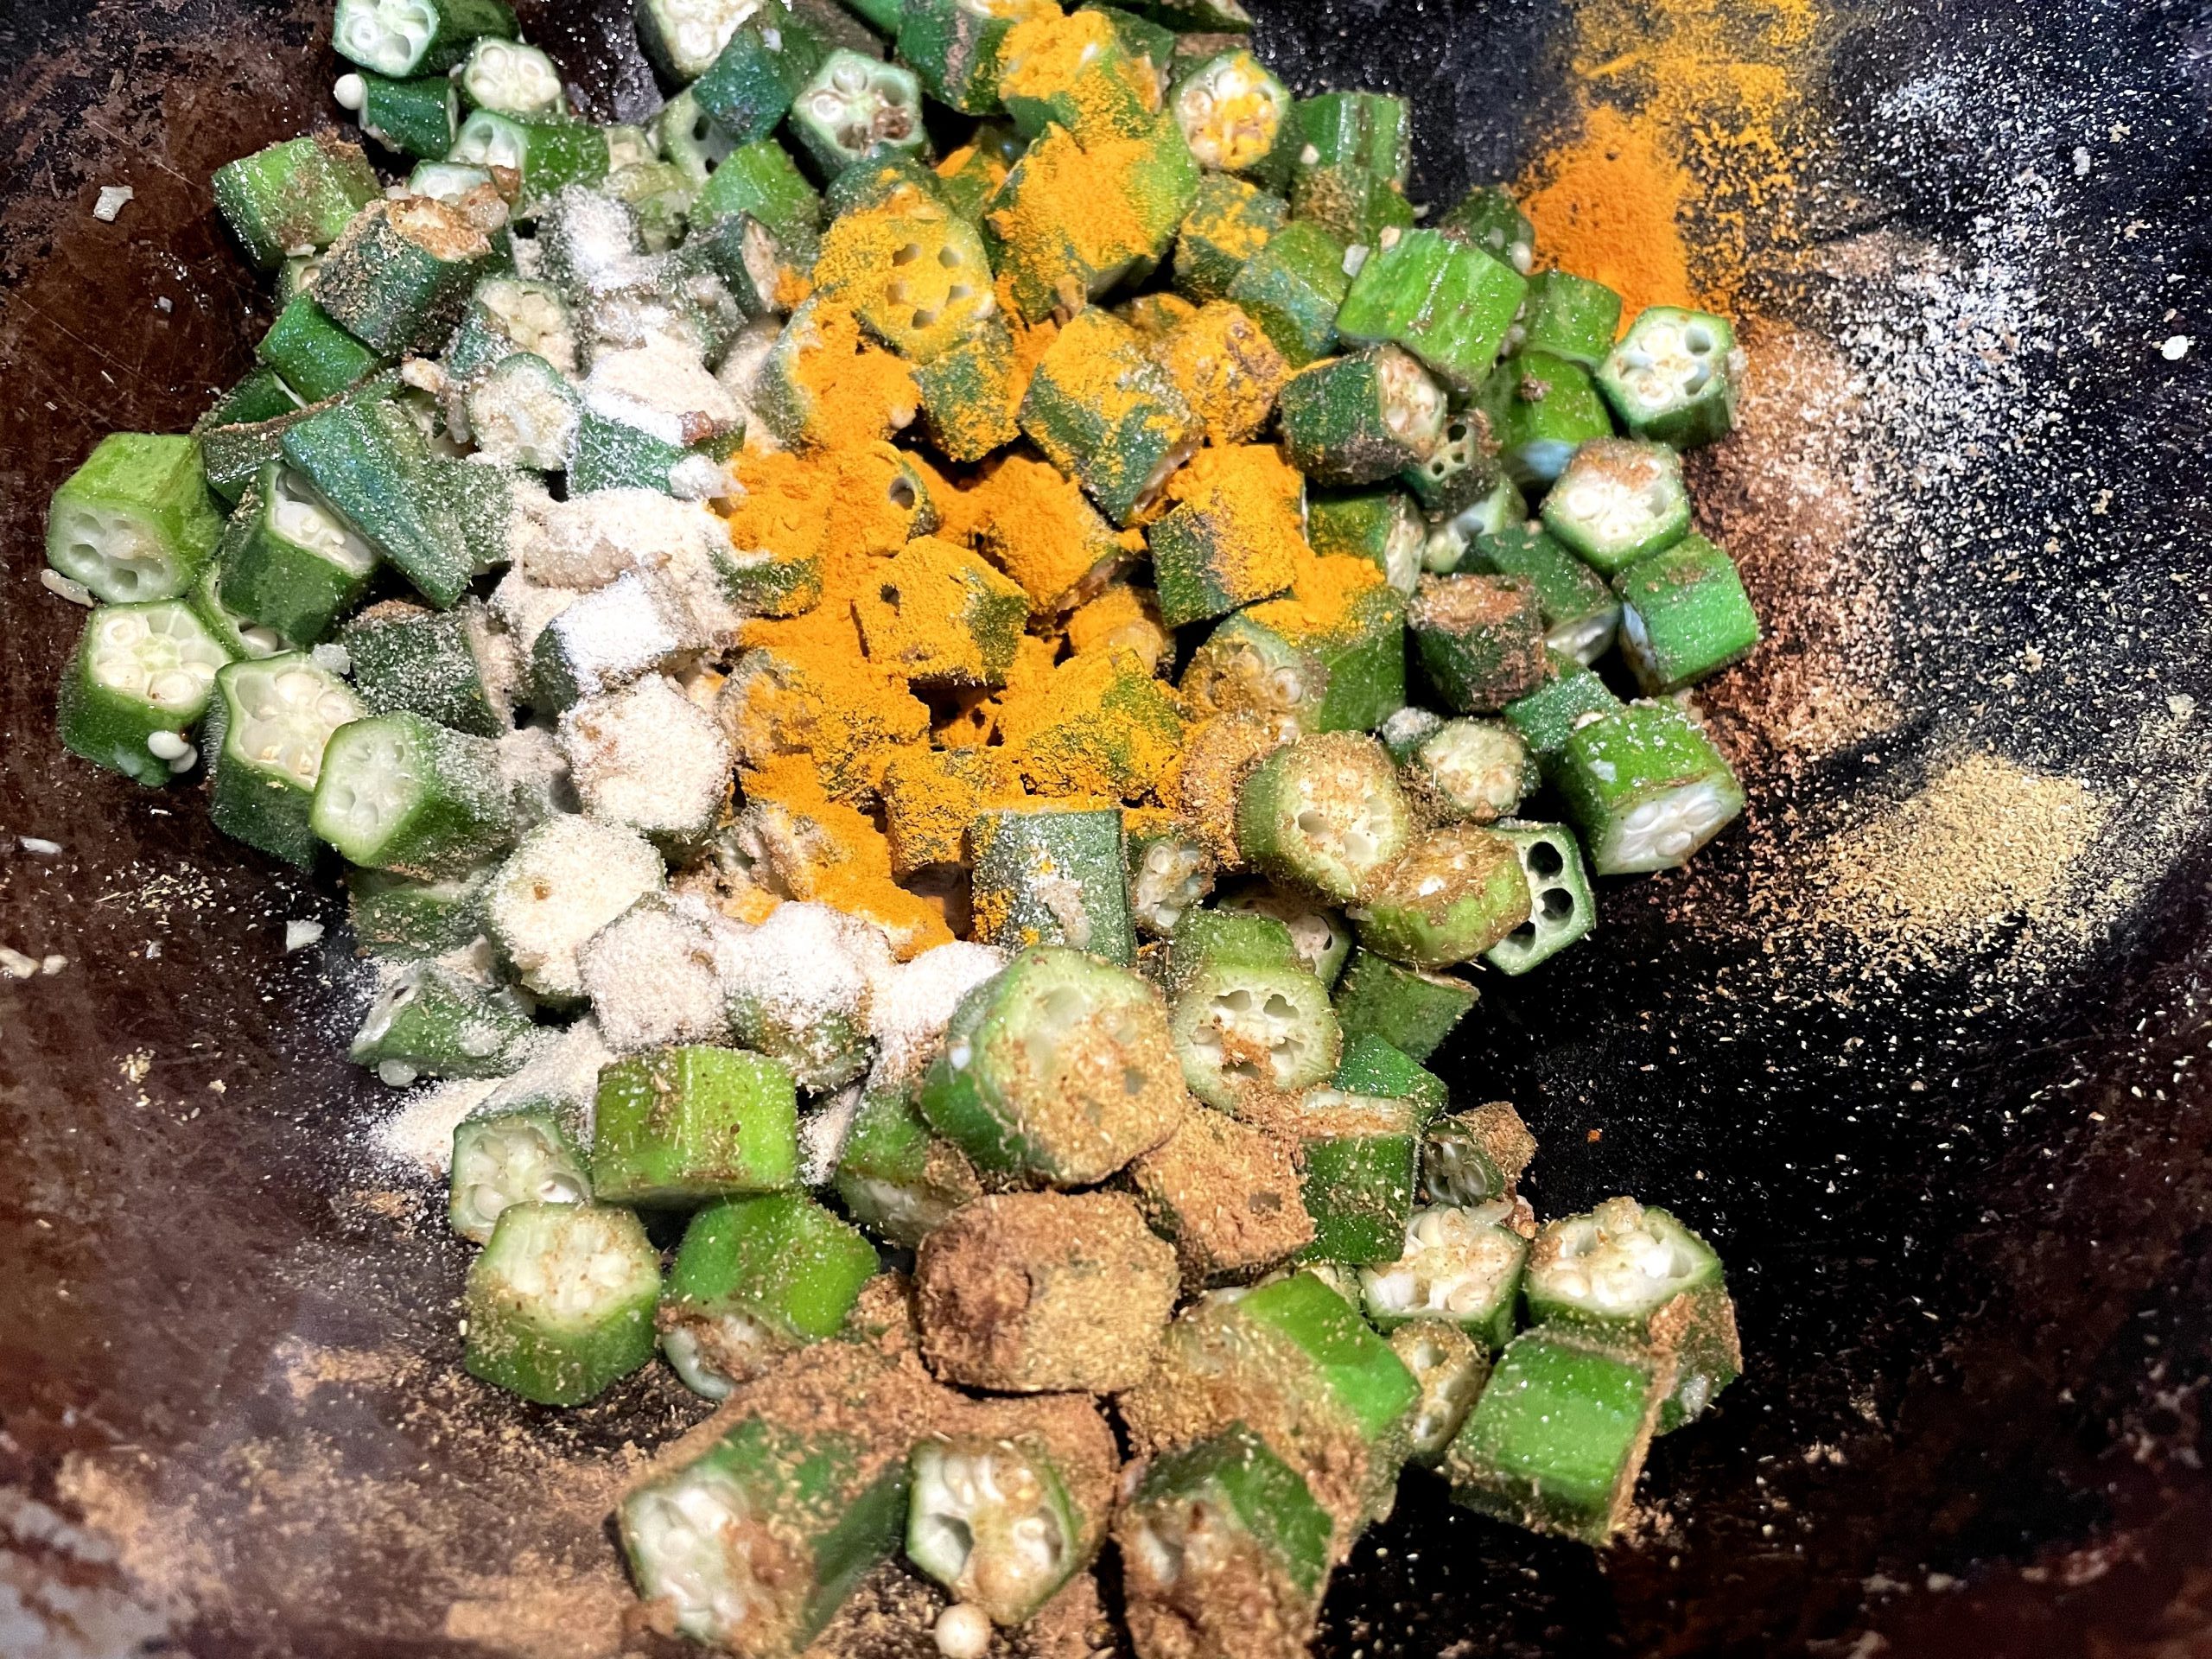 Adding spices to the okra helps absorb the okra juice.